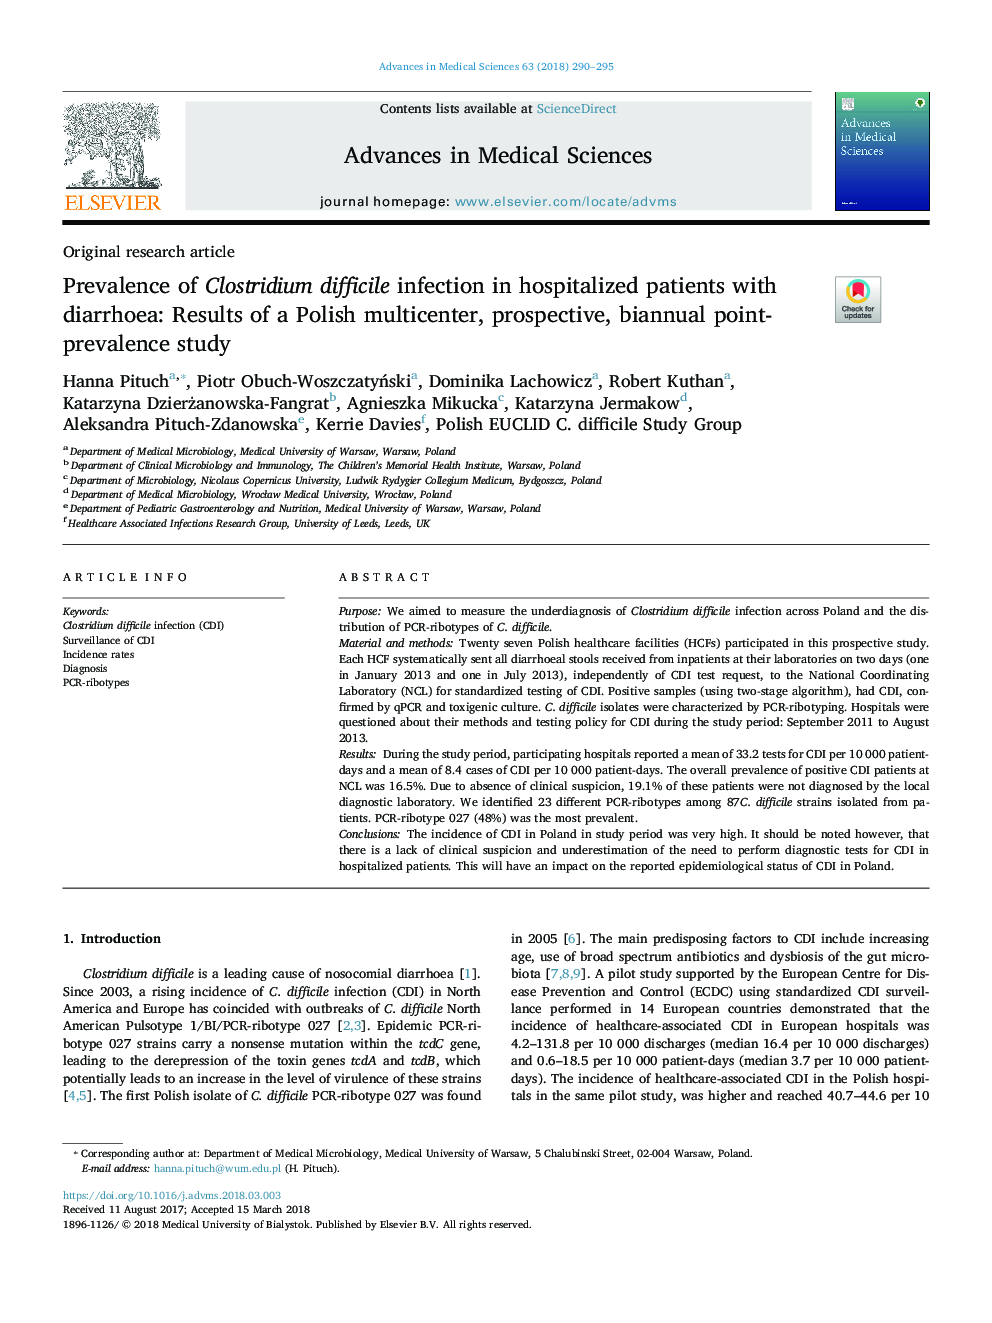 Prevalence of Clostridium difficile infection in hospitalized patients with diarrhoea: Results of a Polish multicenter, prospective, biannual point-prevalence study